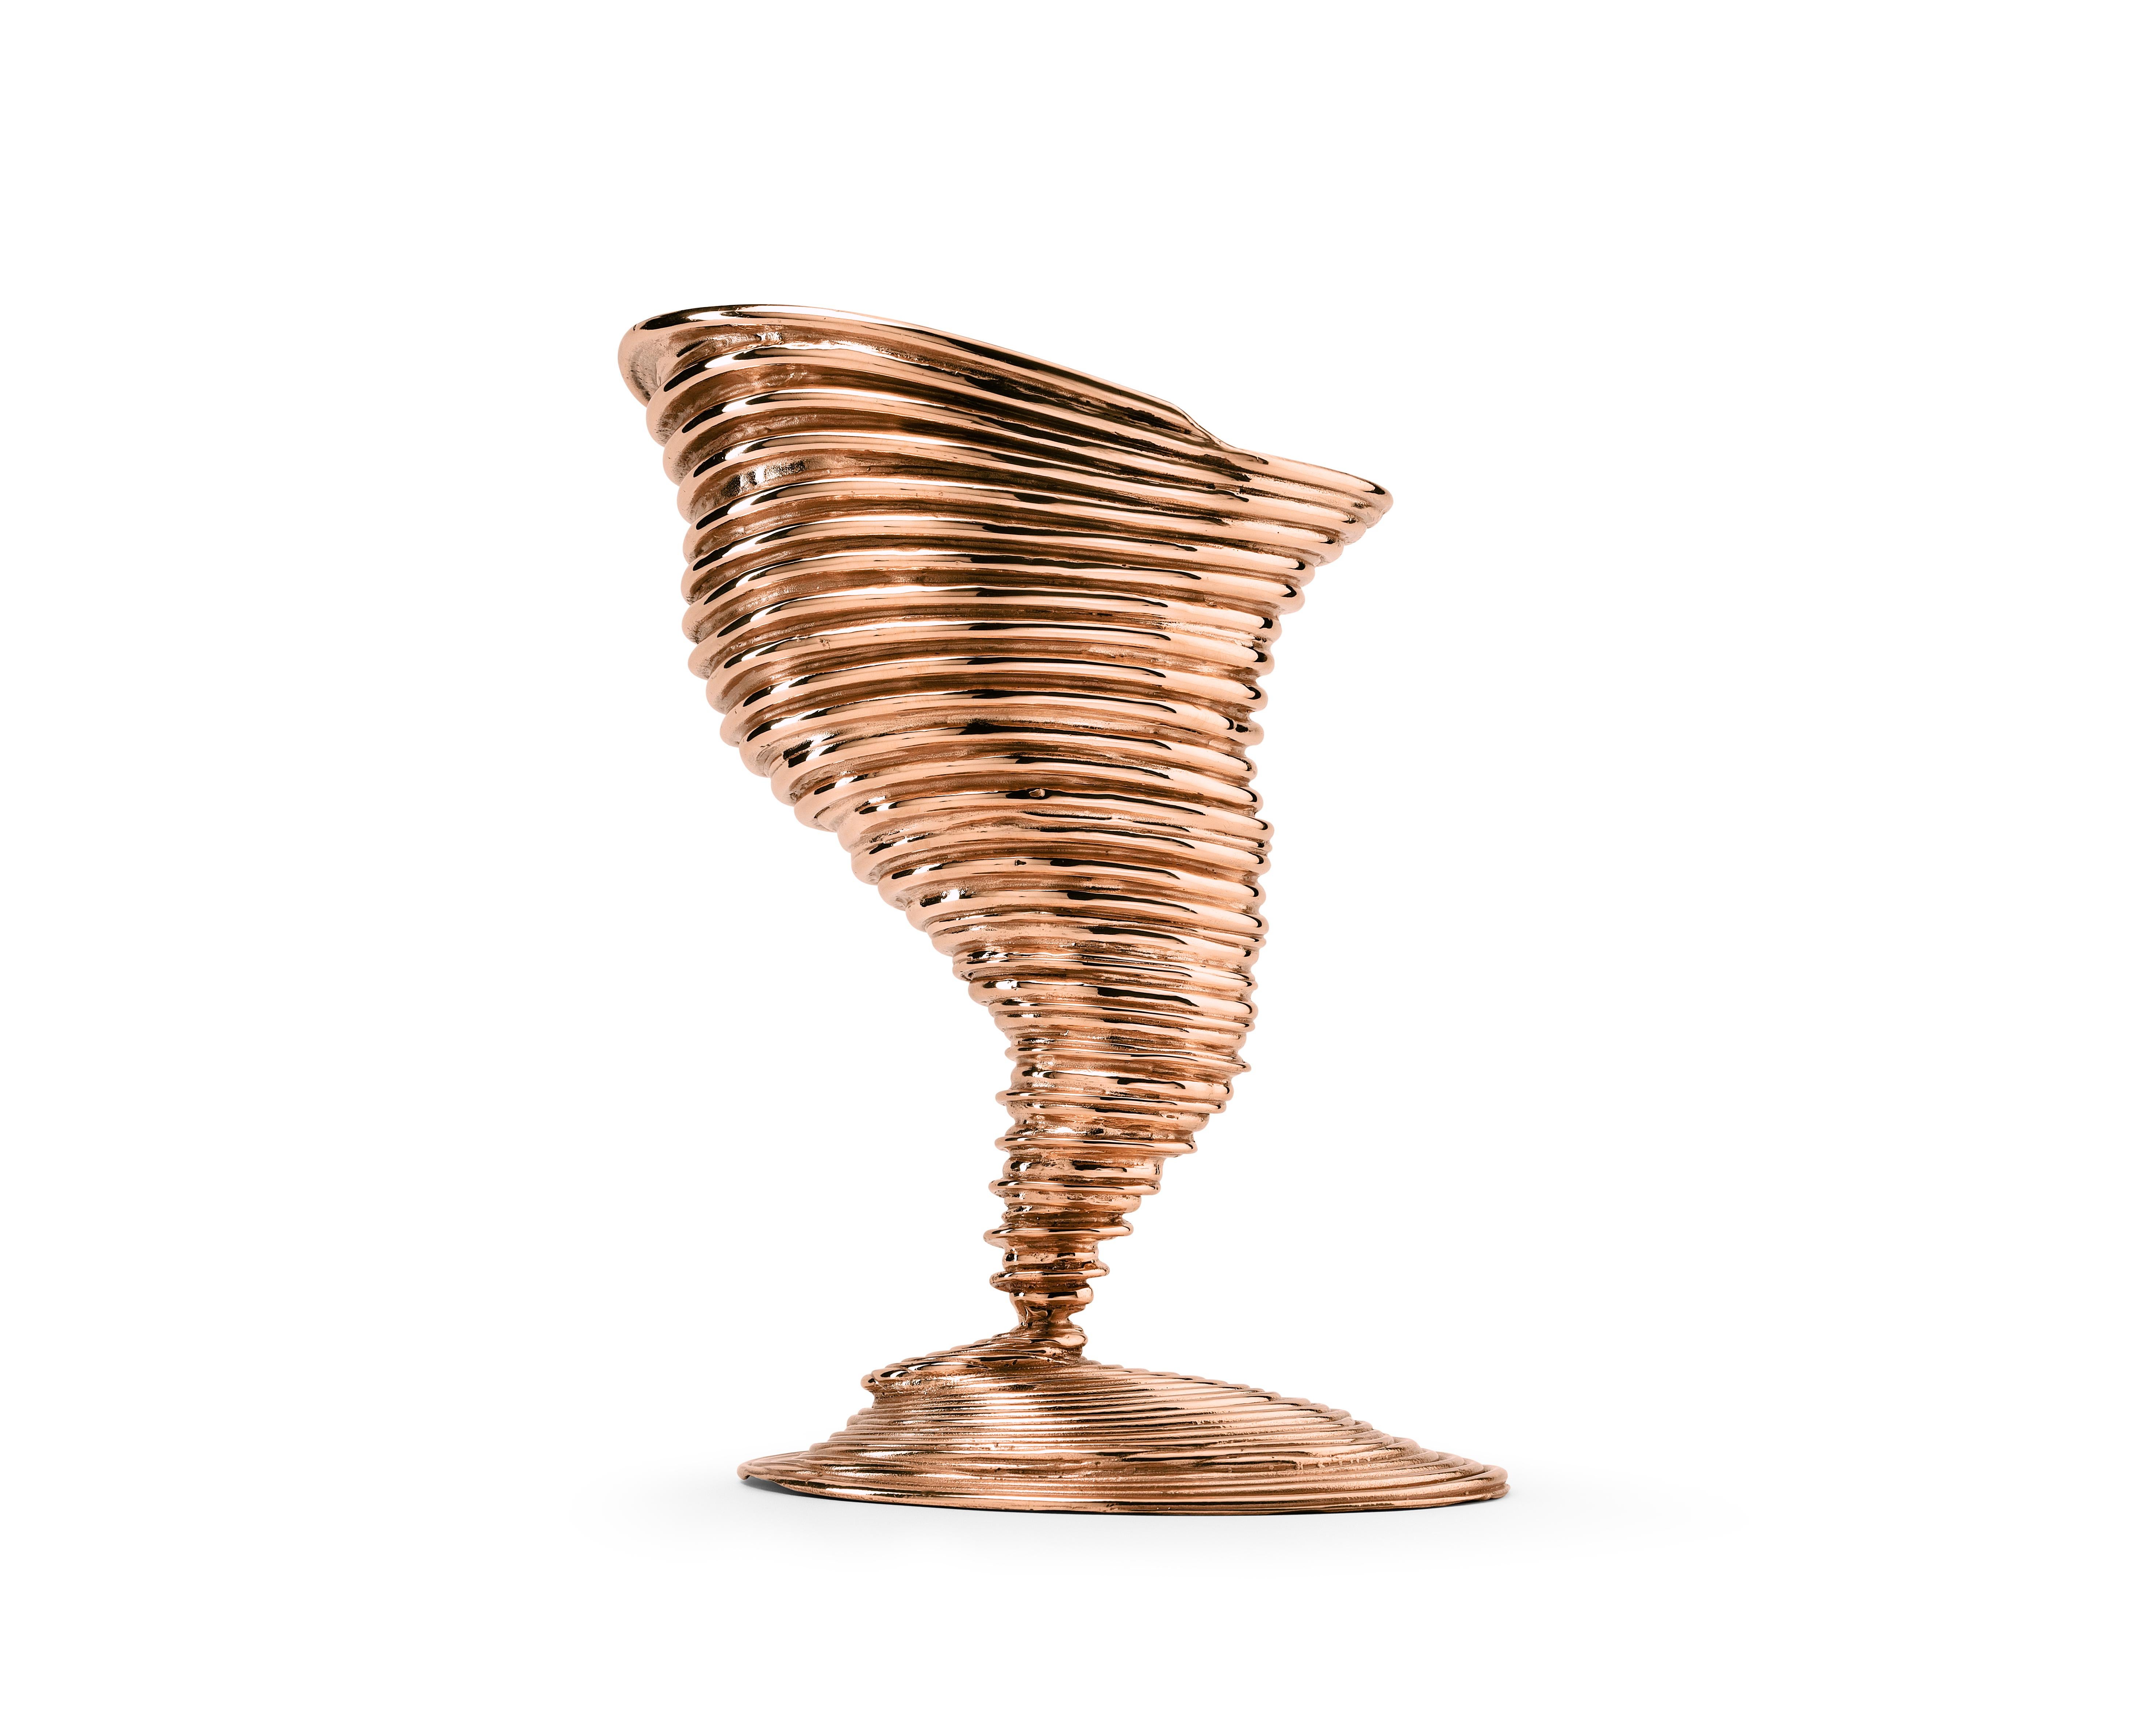 Ghidini 1961 Tornado Vase in Polished Brass by Campana Brothers In New Condition For Sale In Villa Carcina, IT